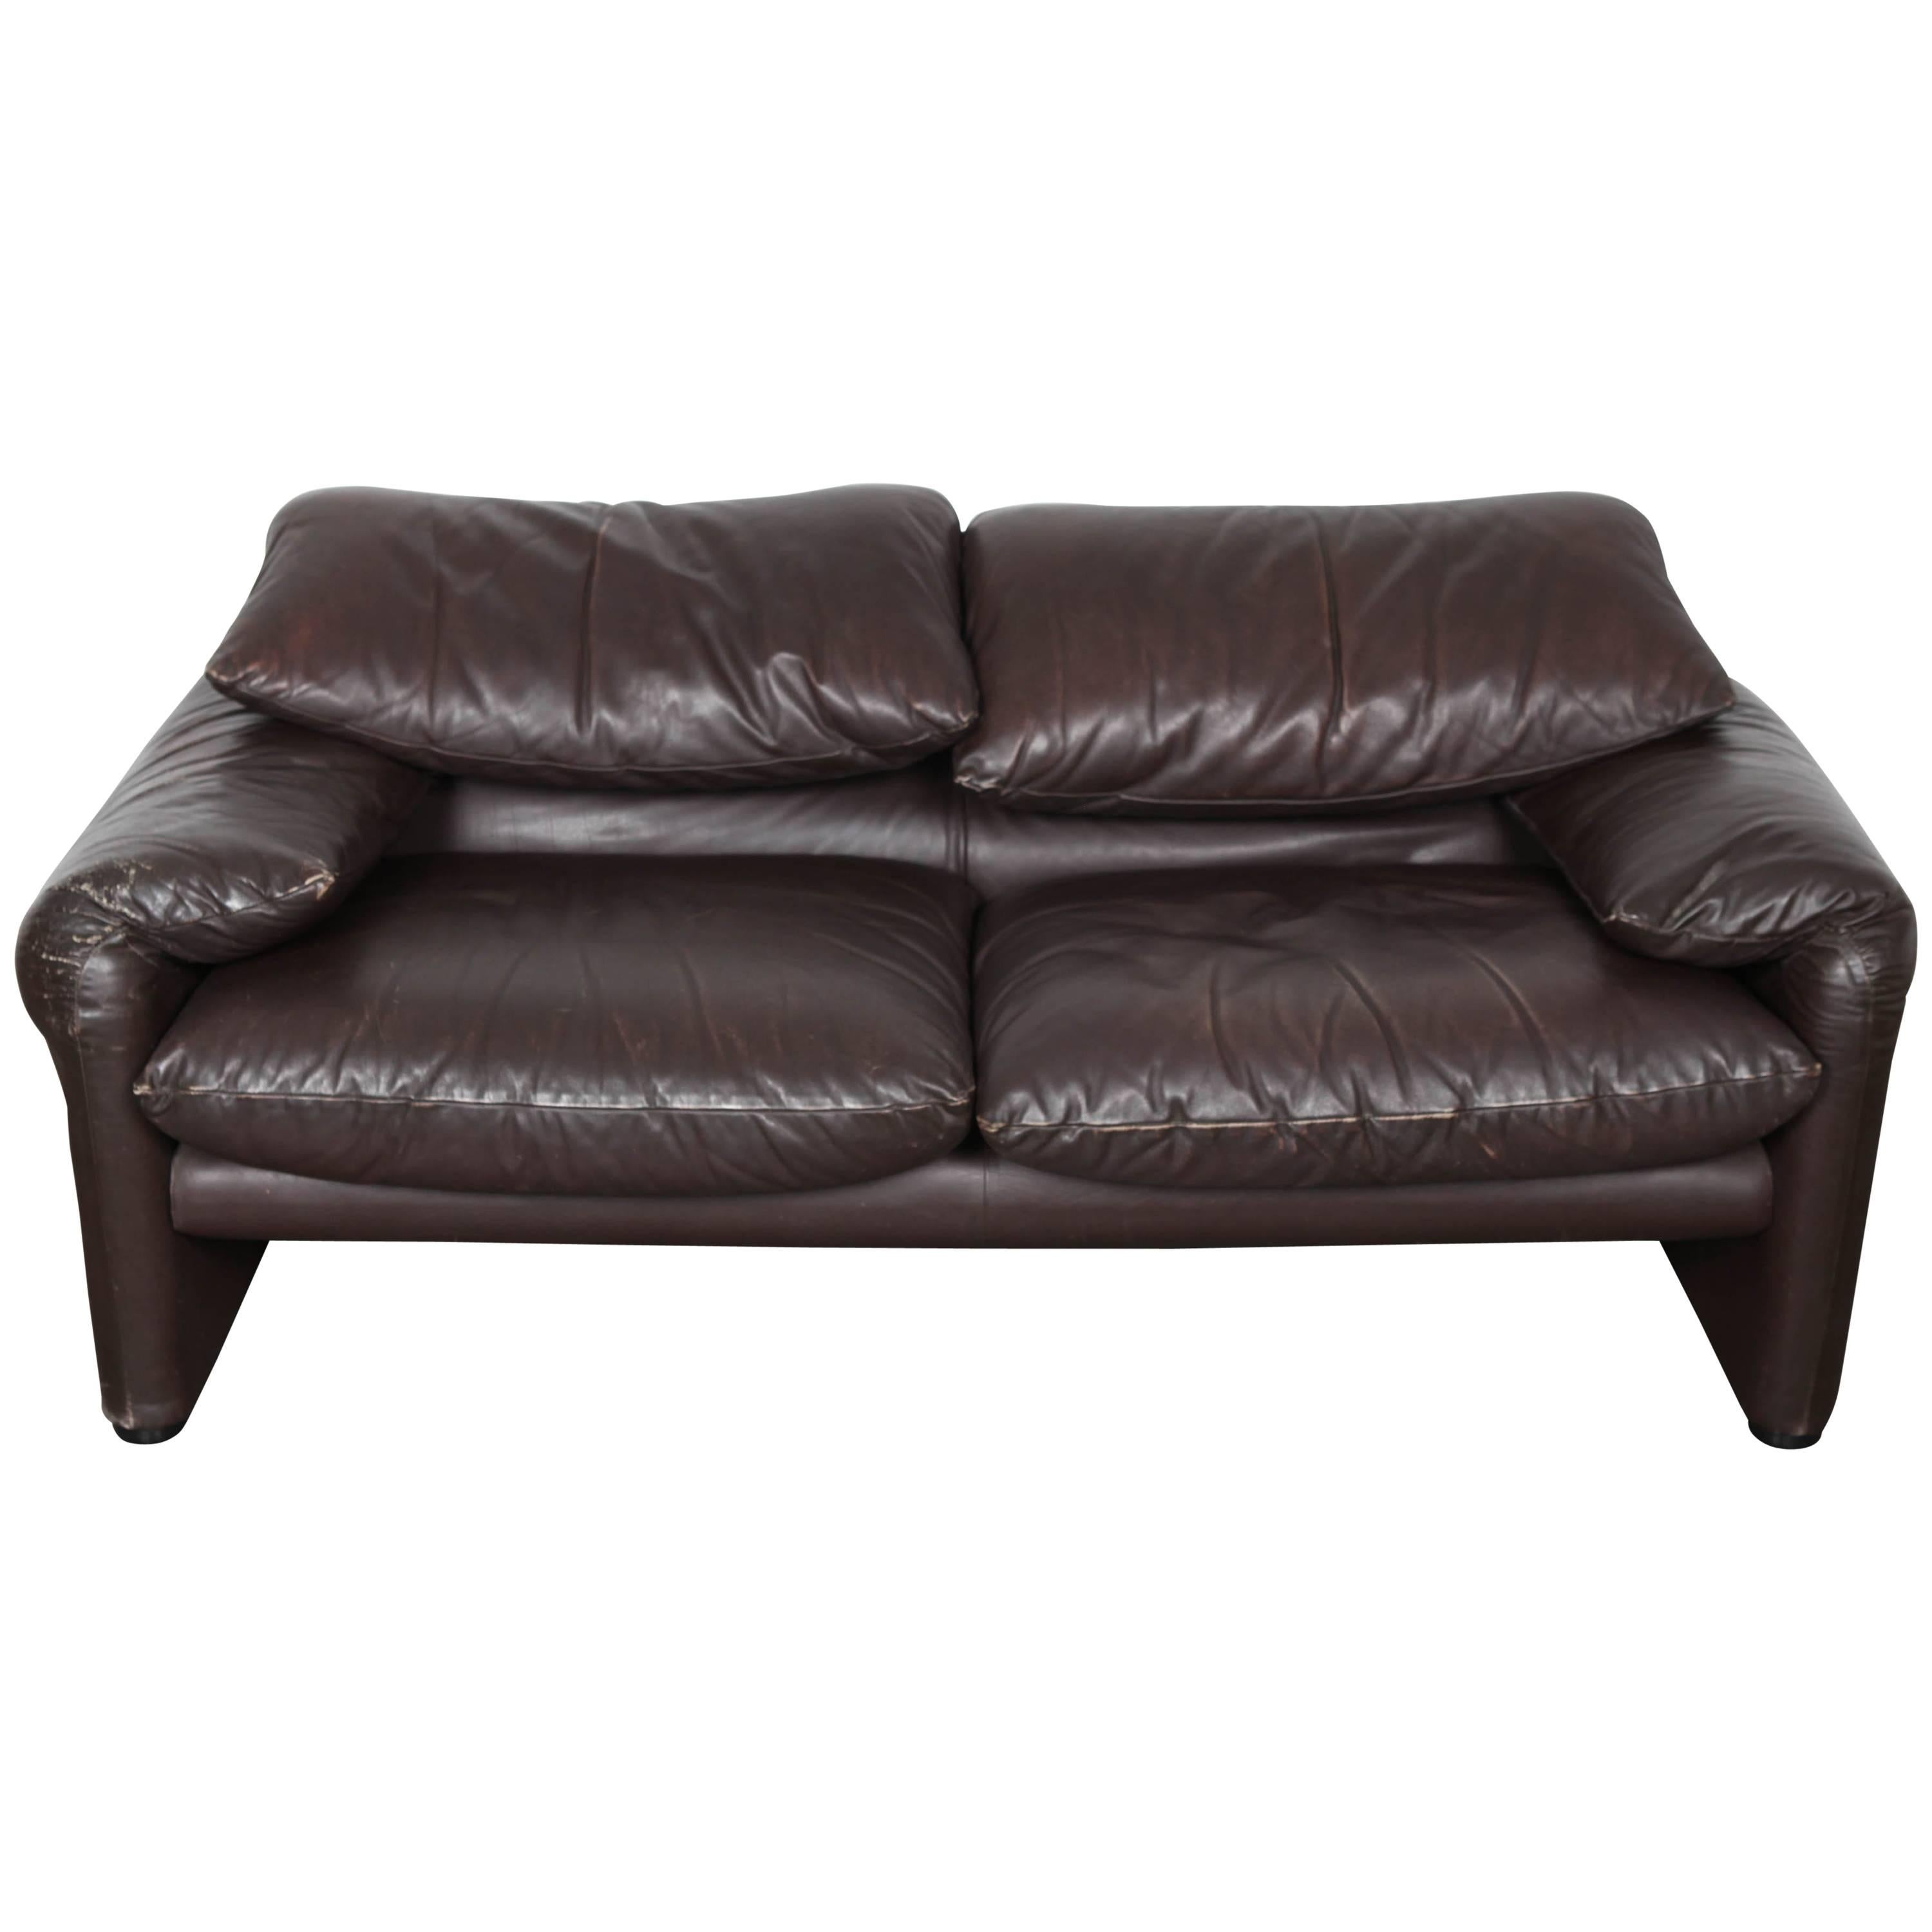 Brown Leather Sofa "Maralunga" by Vico Magistretti with Adjustable Headrest